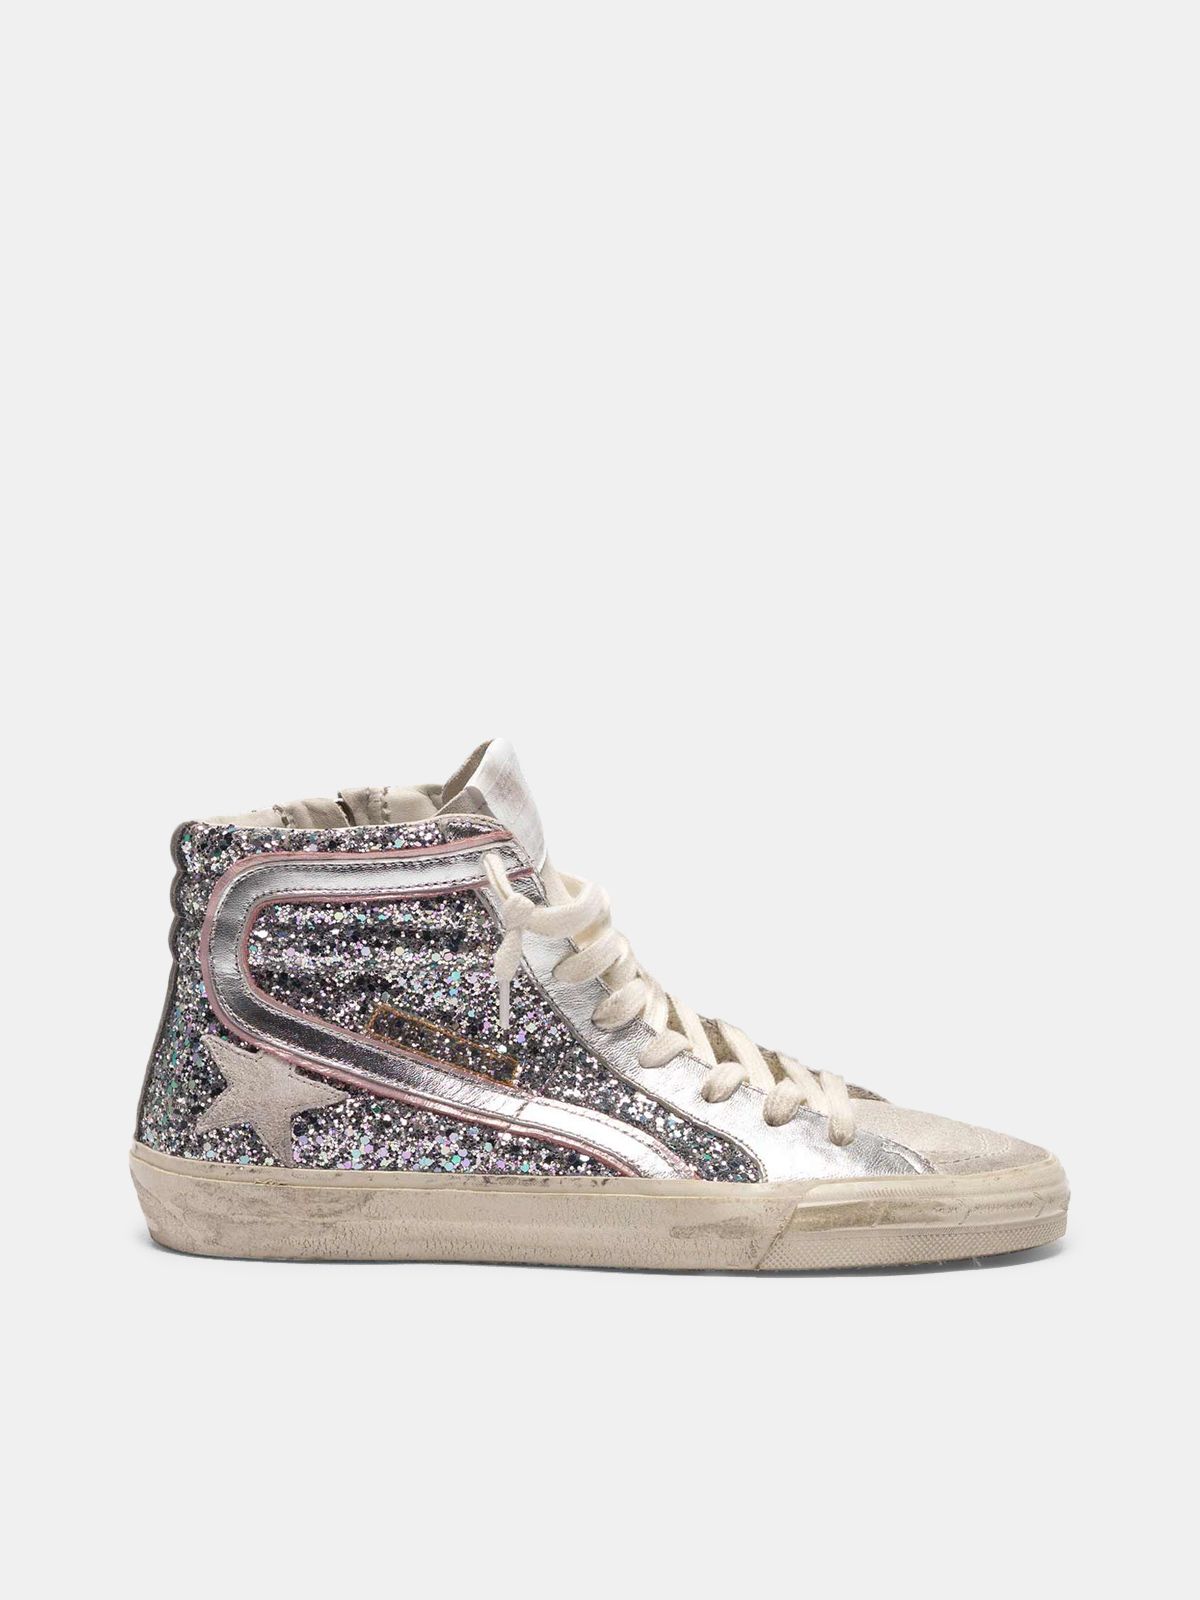 Golden Goose Bambina Slide sneakers in silver laminated leather and glitter